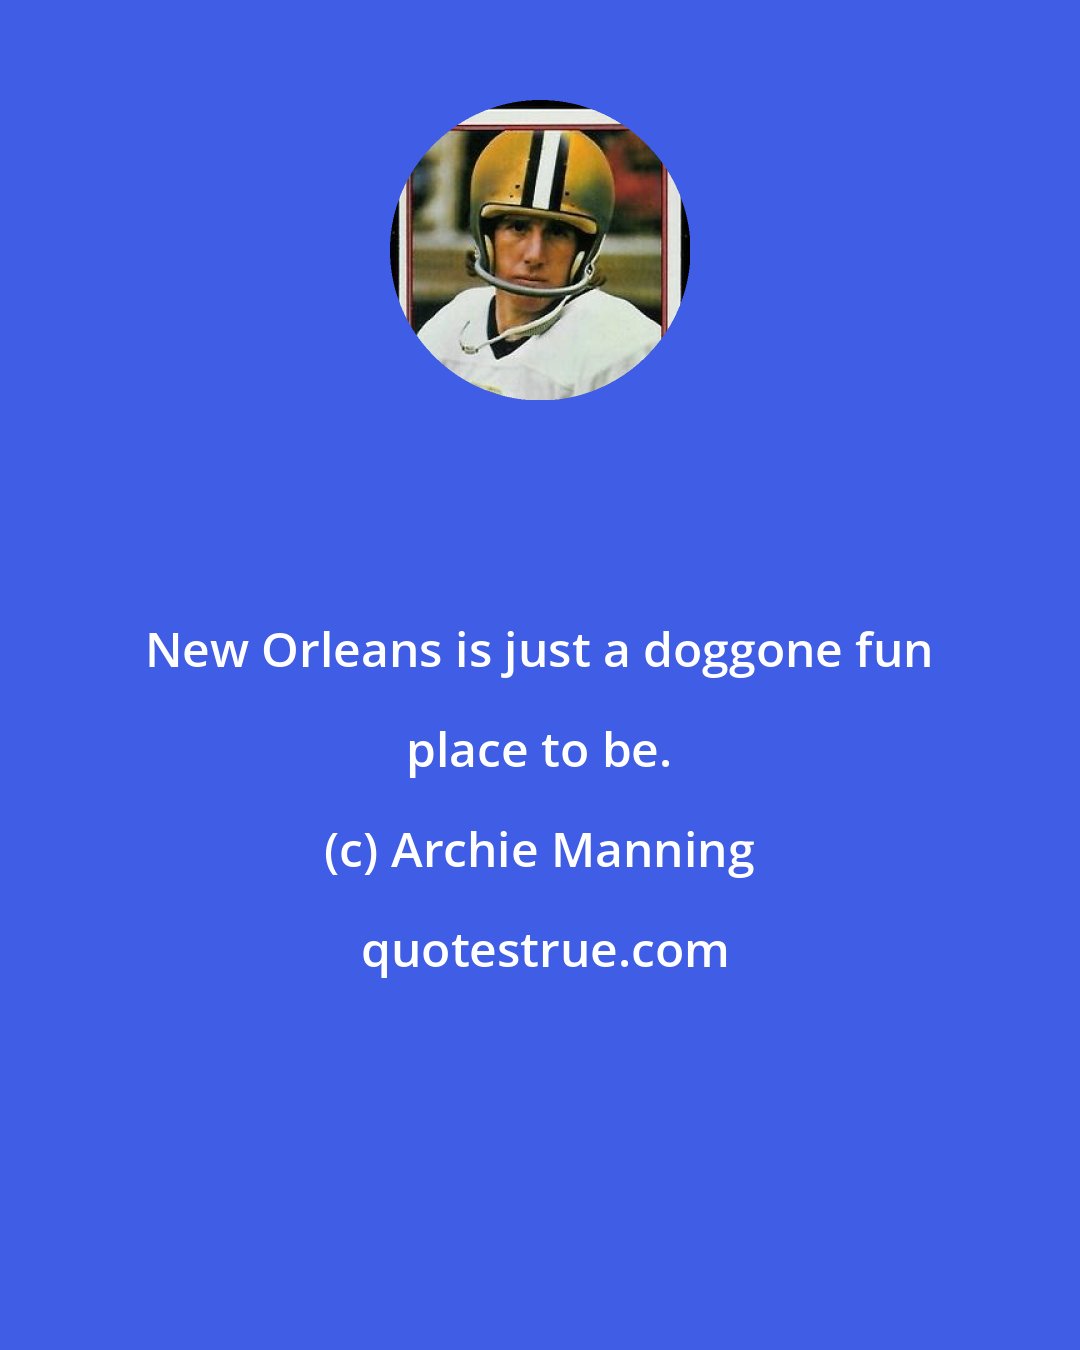 Archie Manning: New Orleans is just a doggone fun place to be.